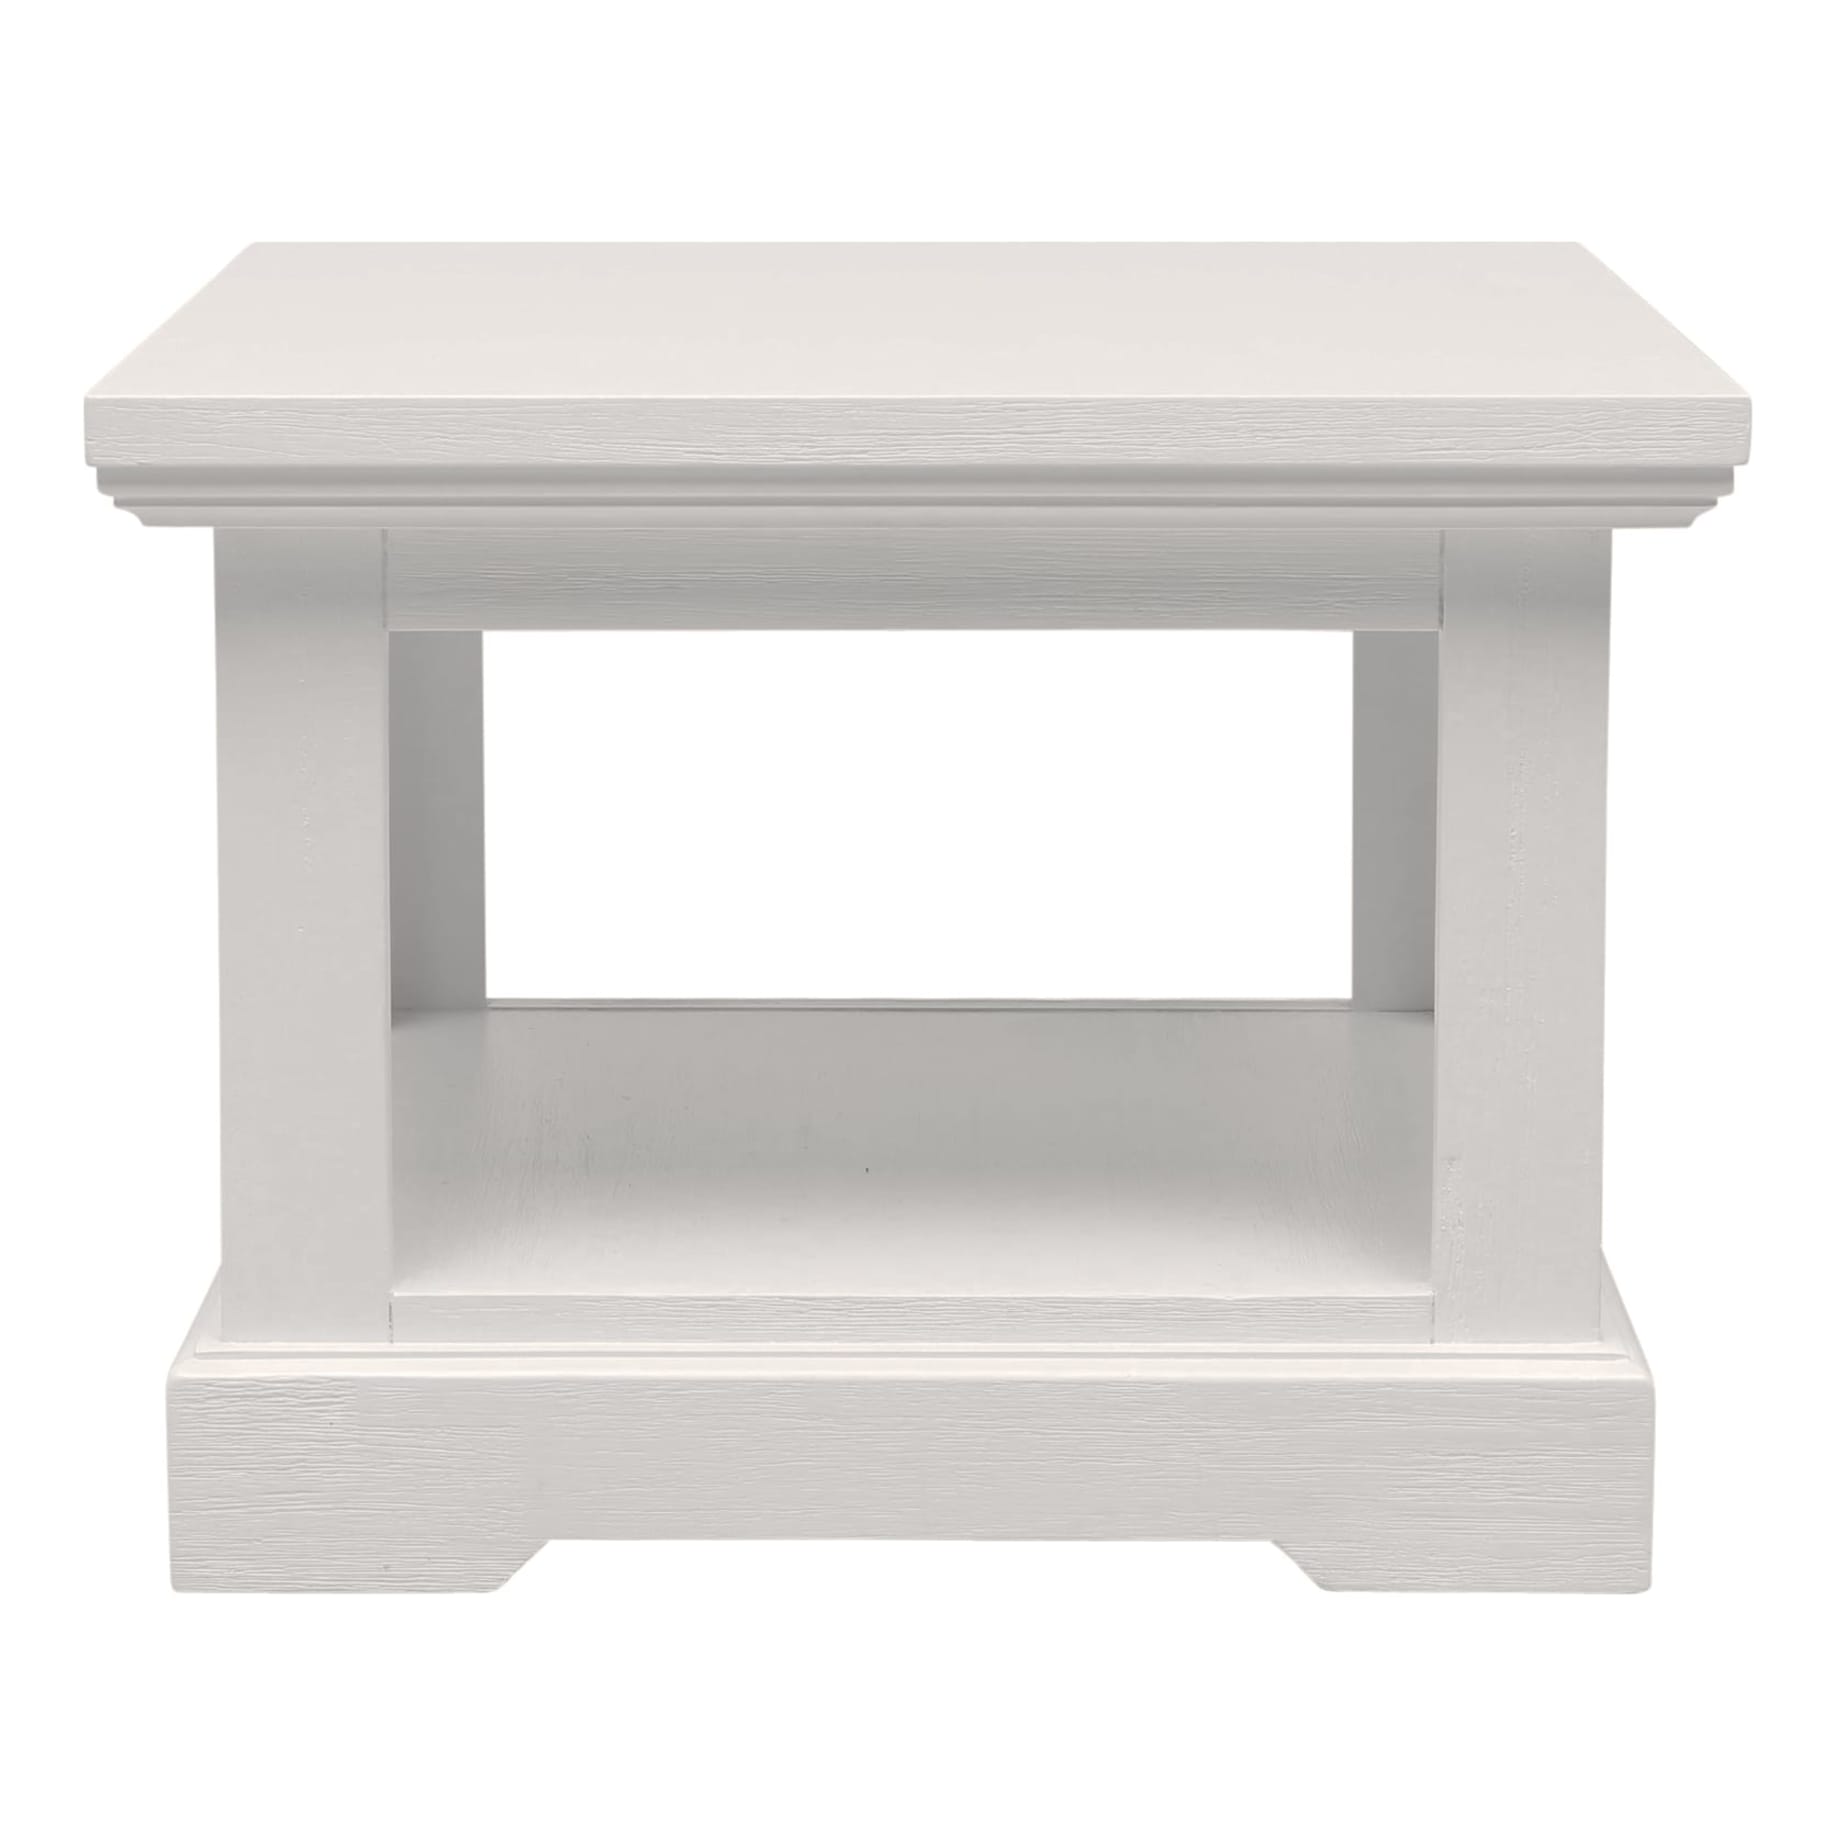 Hamptons Side Table 60cm in Acacia White